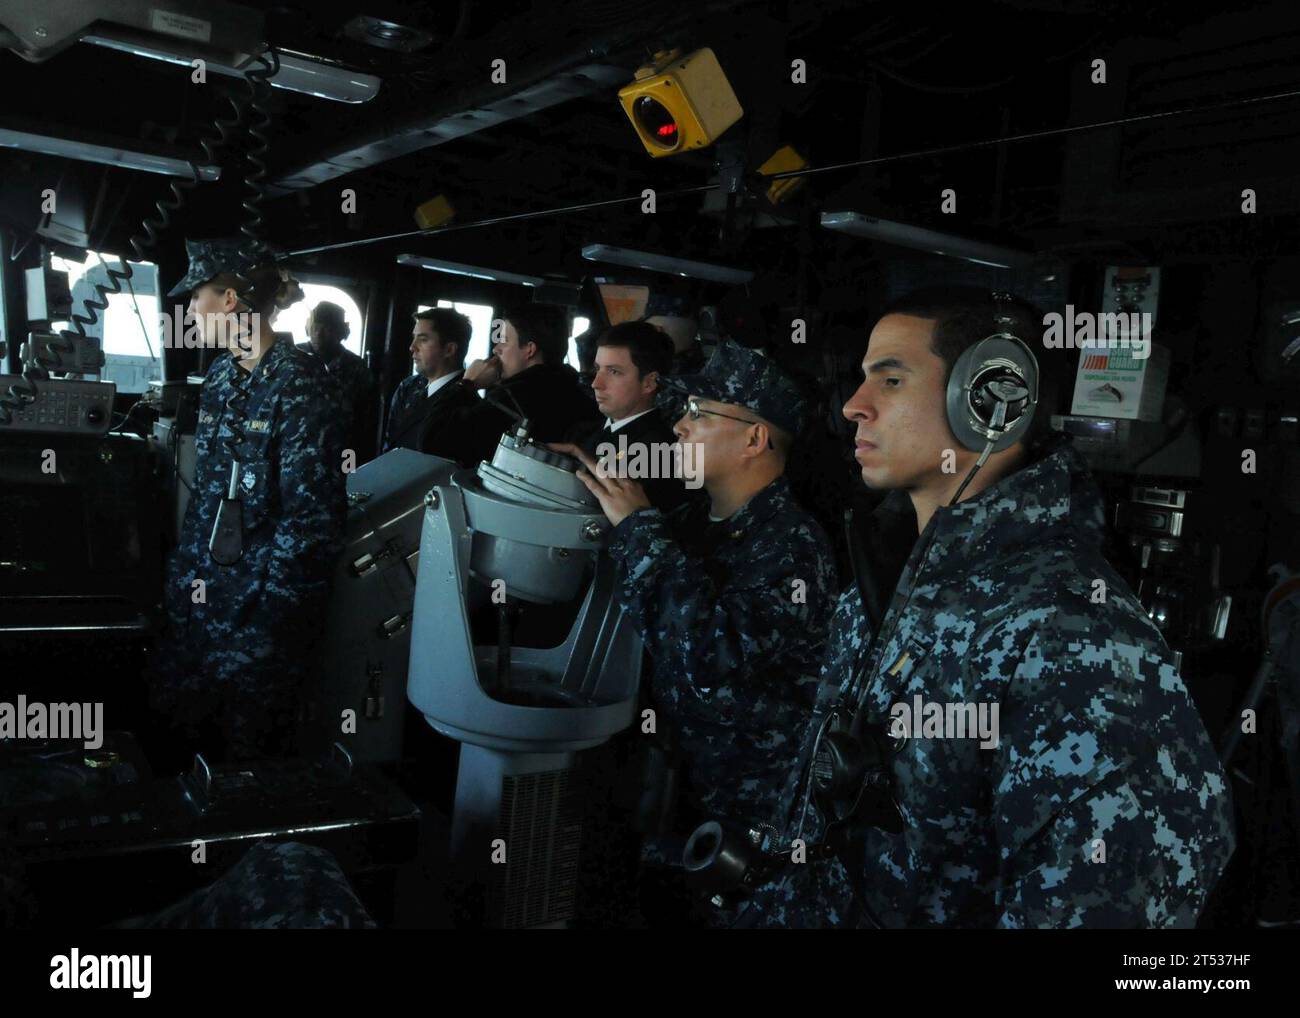 bearings, bridge, Chile, guided-missile frigate, navy, pelorus, Puerto Montt, South America, Southern Seas 2011, U.S. Navy, USS Thach (FFG 43) Stock Photo